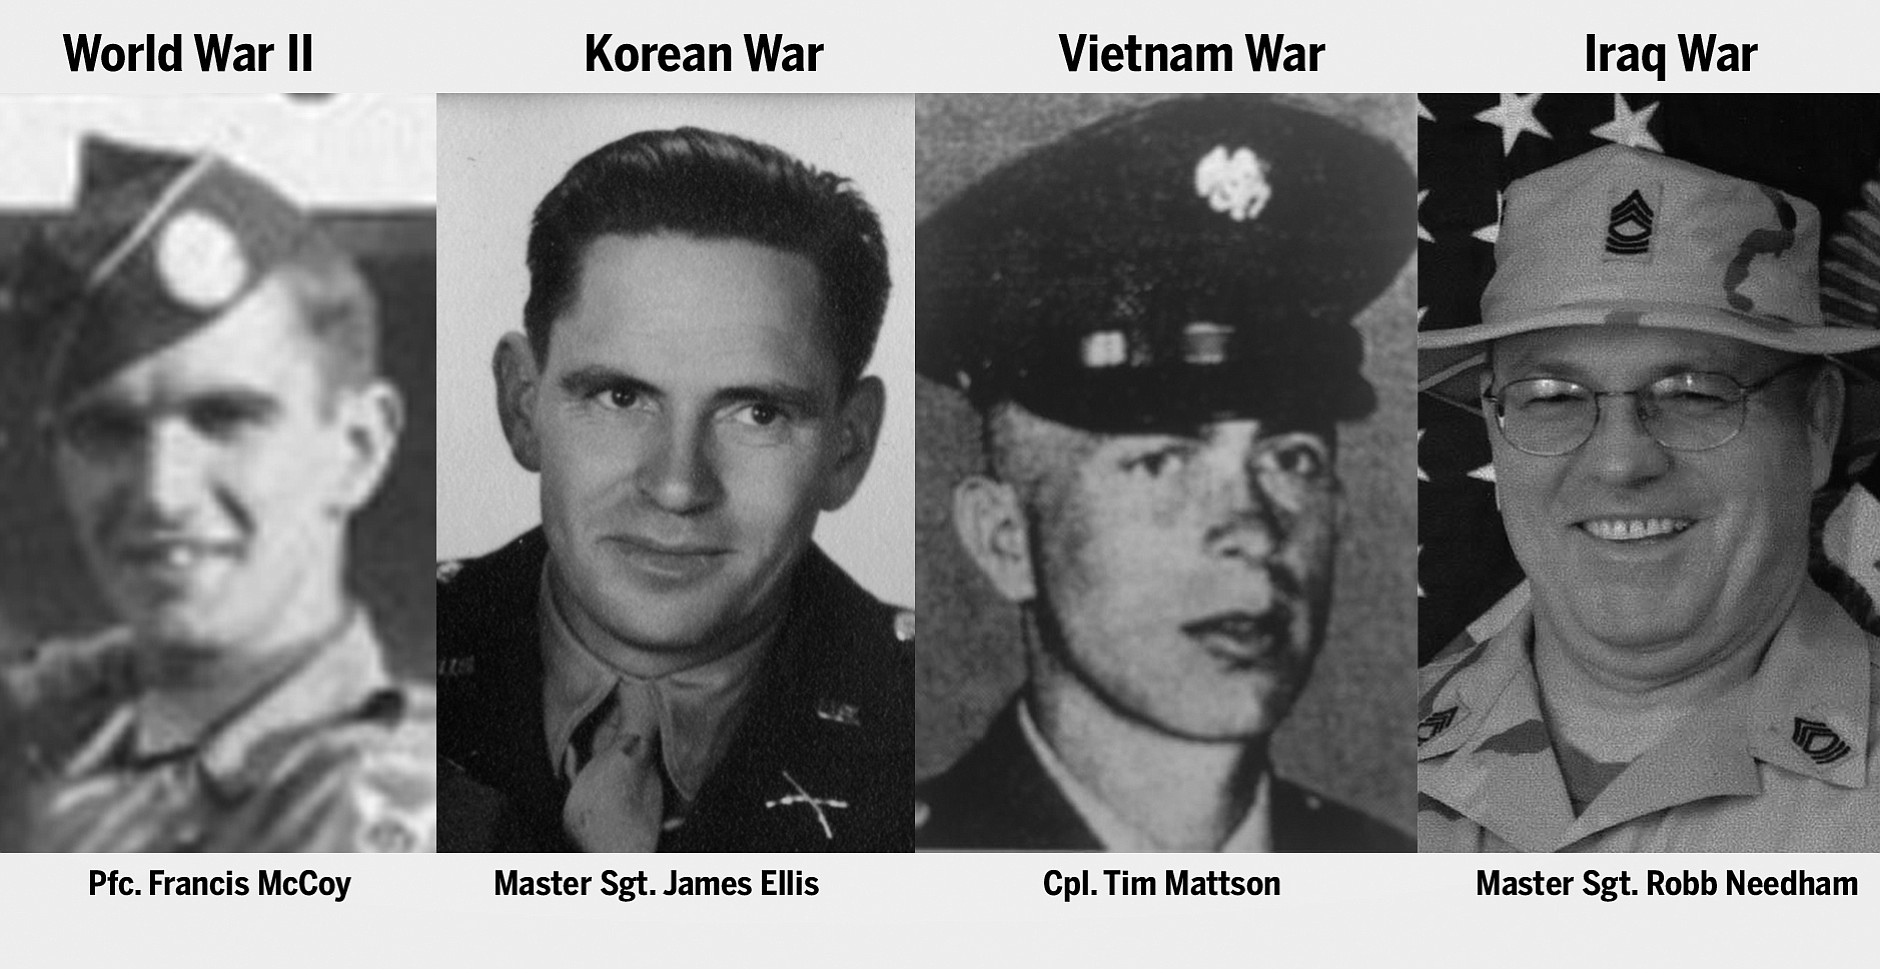 Looking ahead to Memorial Day, several local families shared their memories of four of those soldiers who died over the last 70 years or so: Pfc. Francis McCoy (World War II); Master Sgt. James Ellis (Korea); Cpl. Tim Mattson (Vietnam); and Master Sgt. Robb Needham (Iraq).